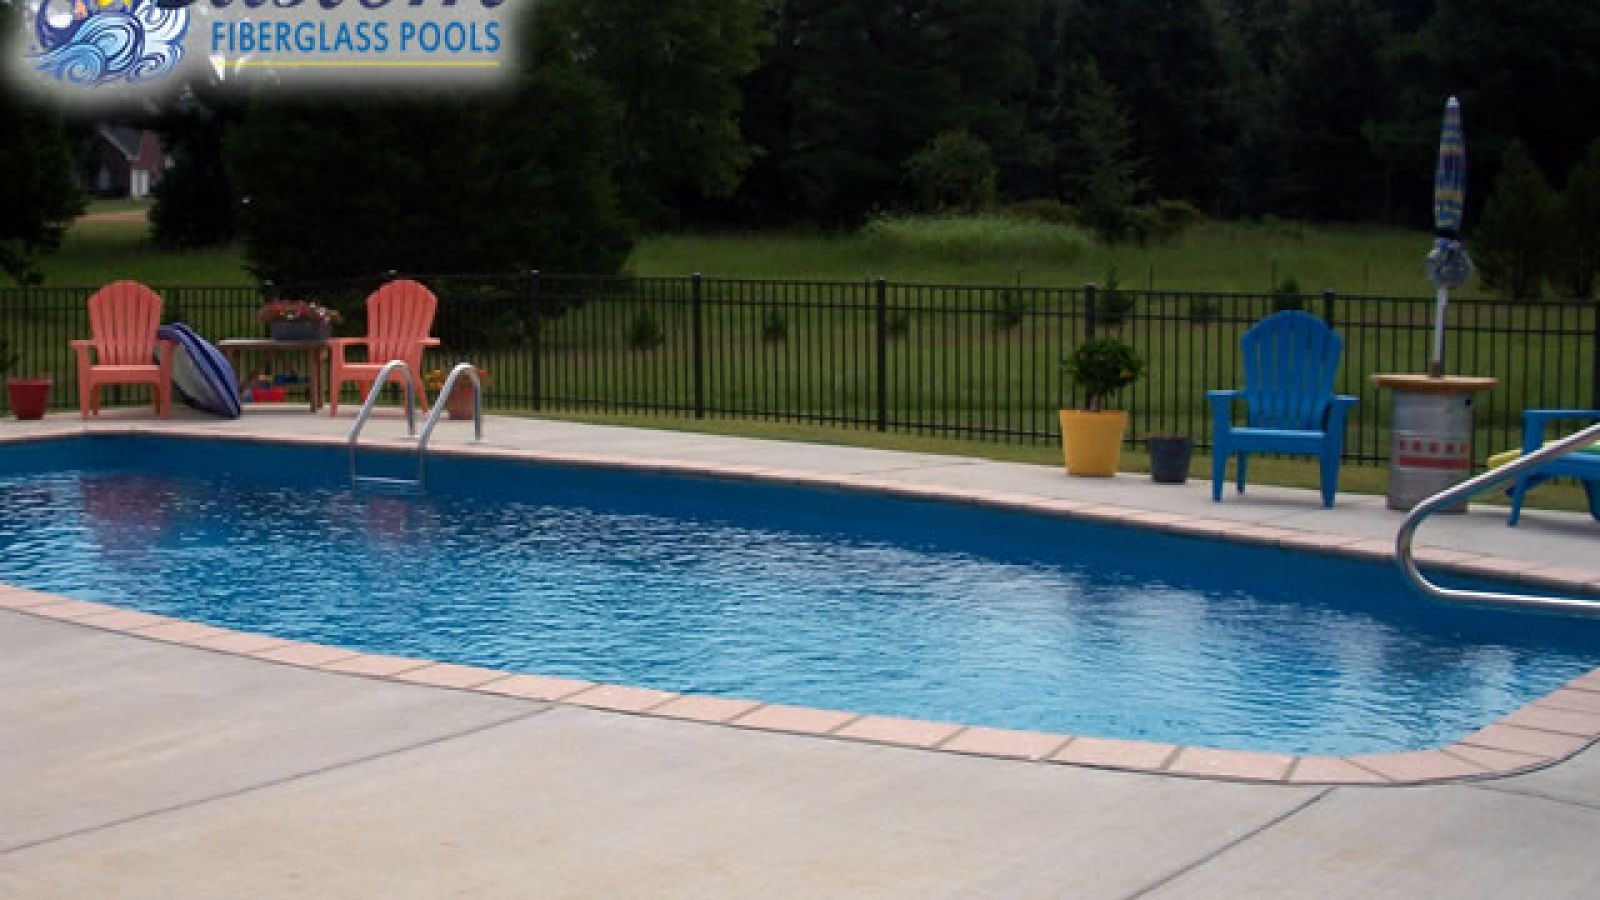 Sunset Cay Luxury Fiberglass Pool, a sophisticated and spacious addition to a Clarksville, TN backyard